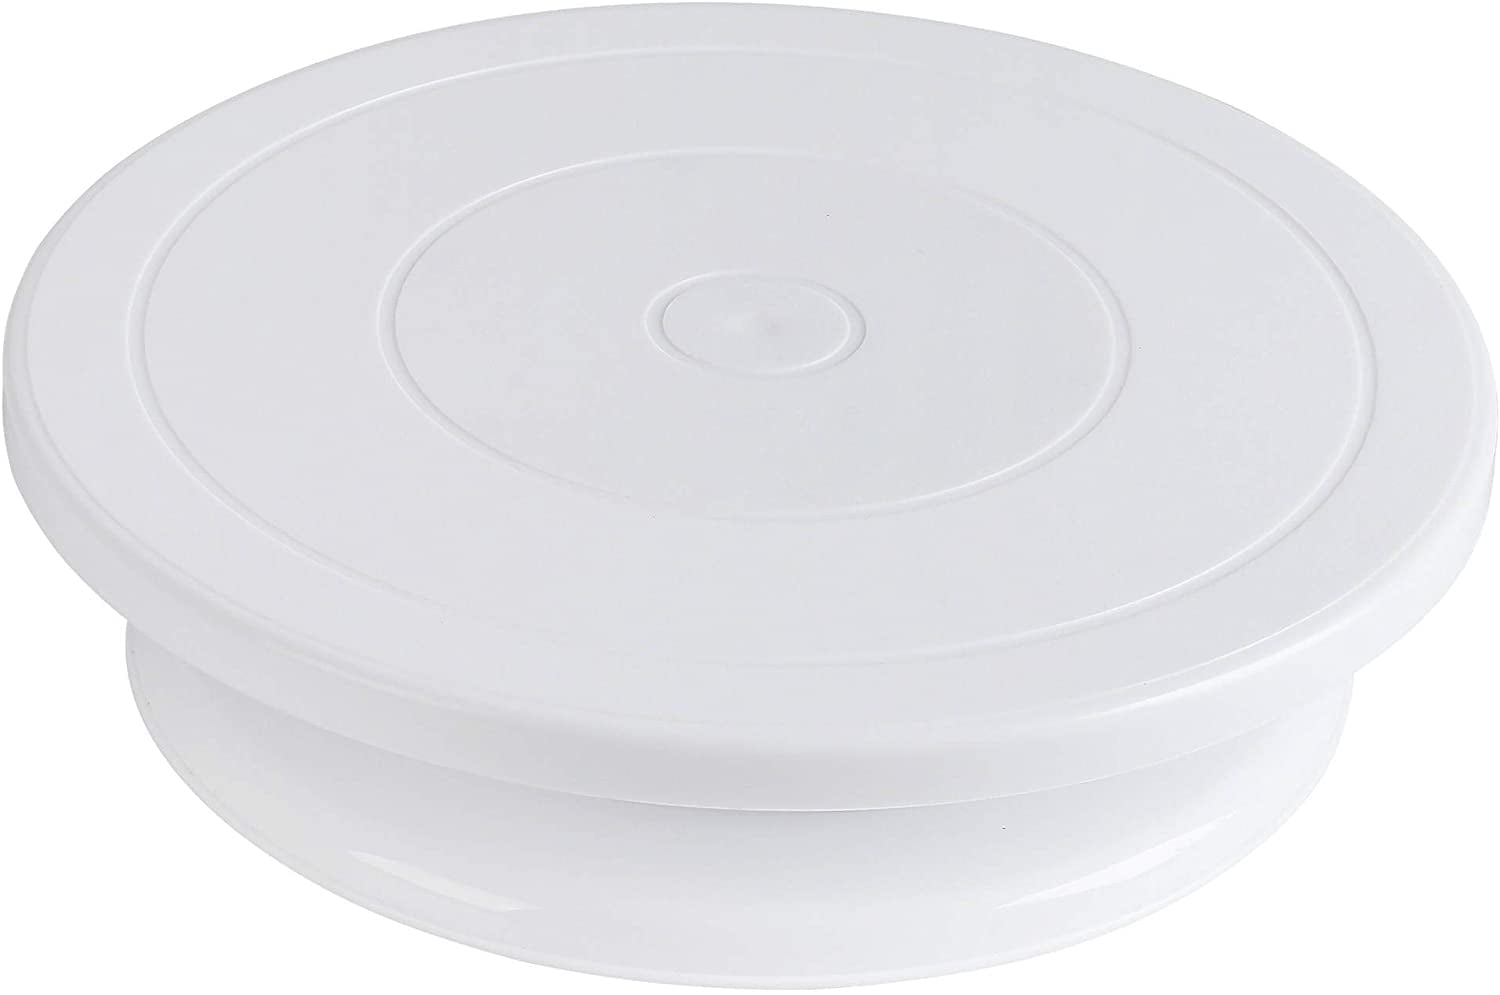 Wilton Round Decorating Turntable for Cake Decorating, Plastic, 12 inch